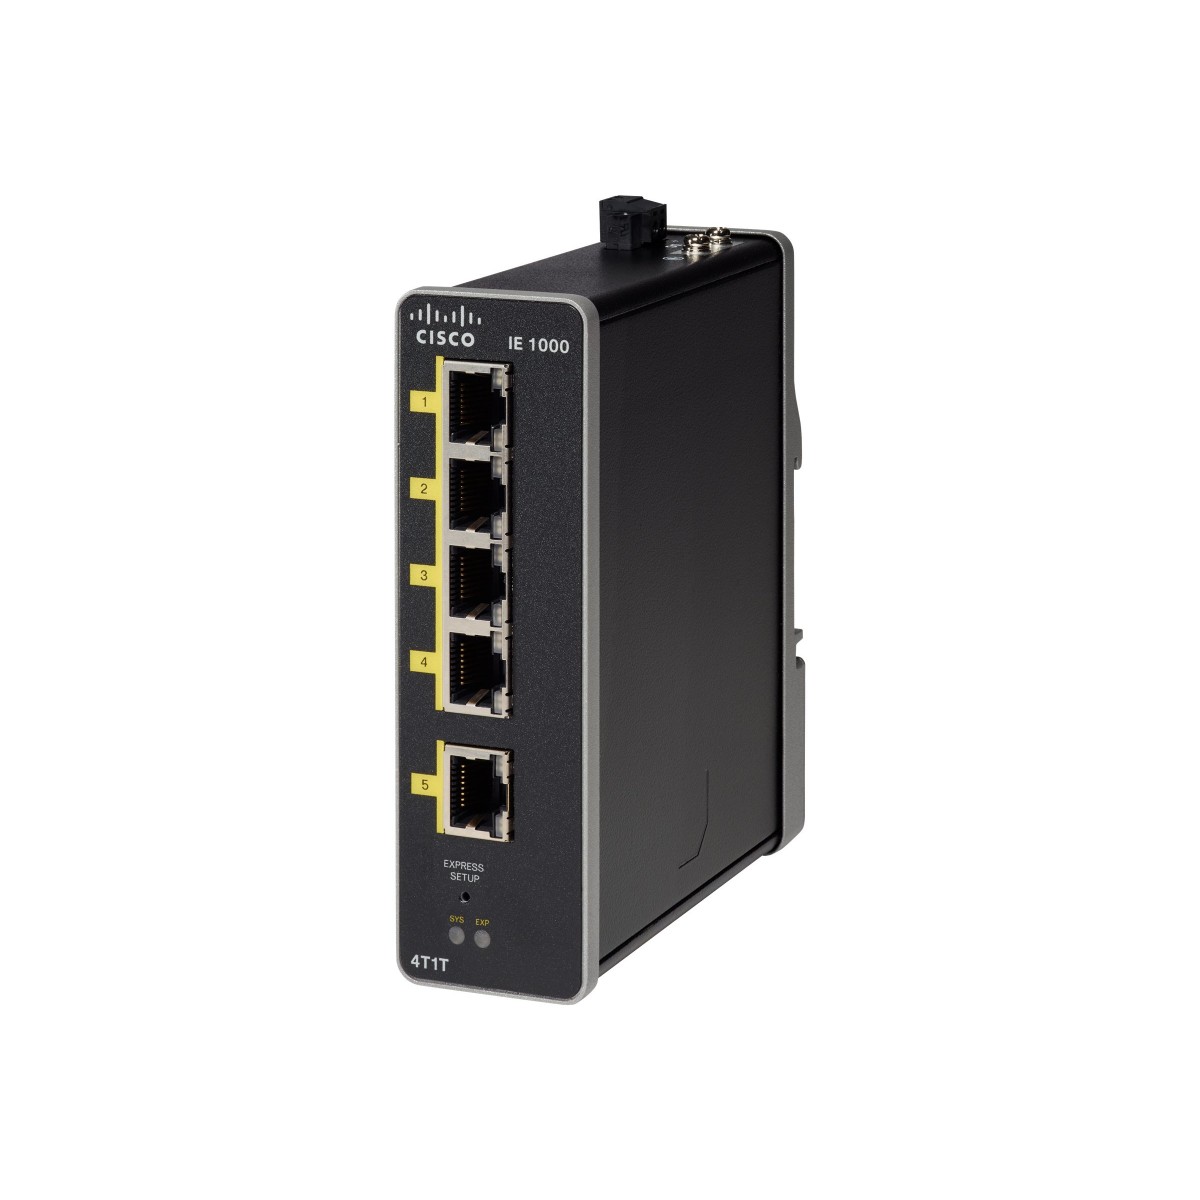 Cisco IE-1000-4T1T-LM - Managed - Fast Ethernet (10/100) - Full duplex